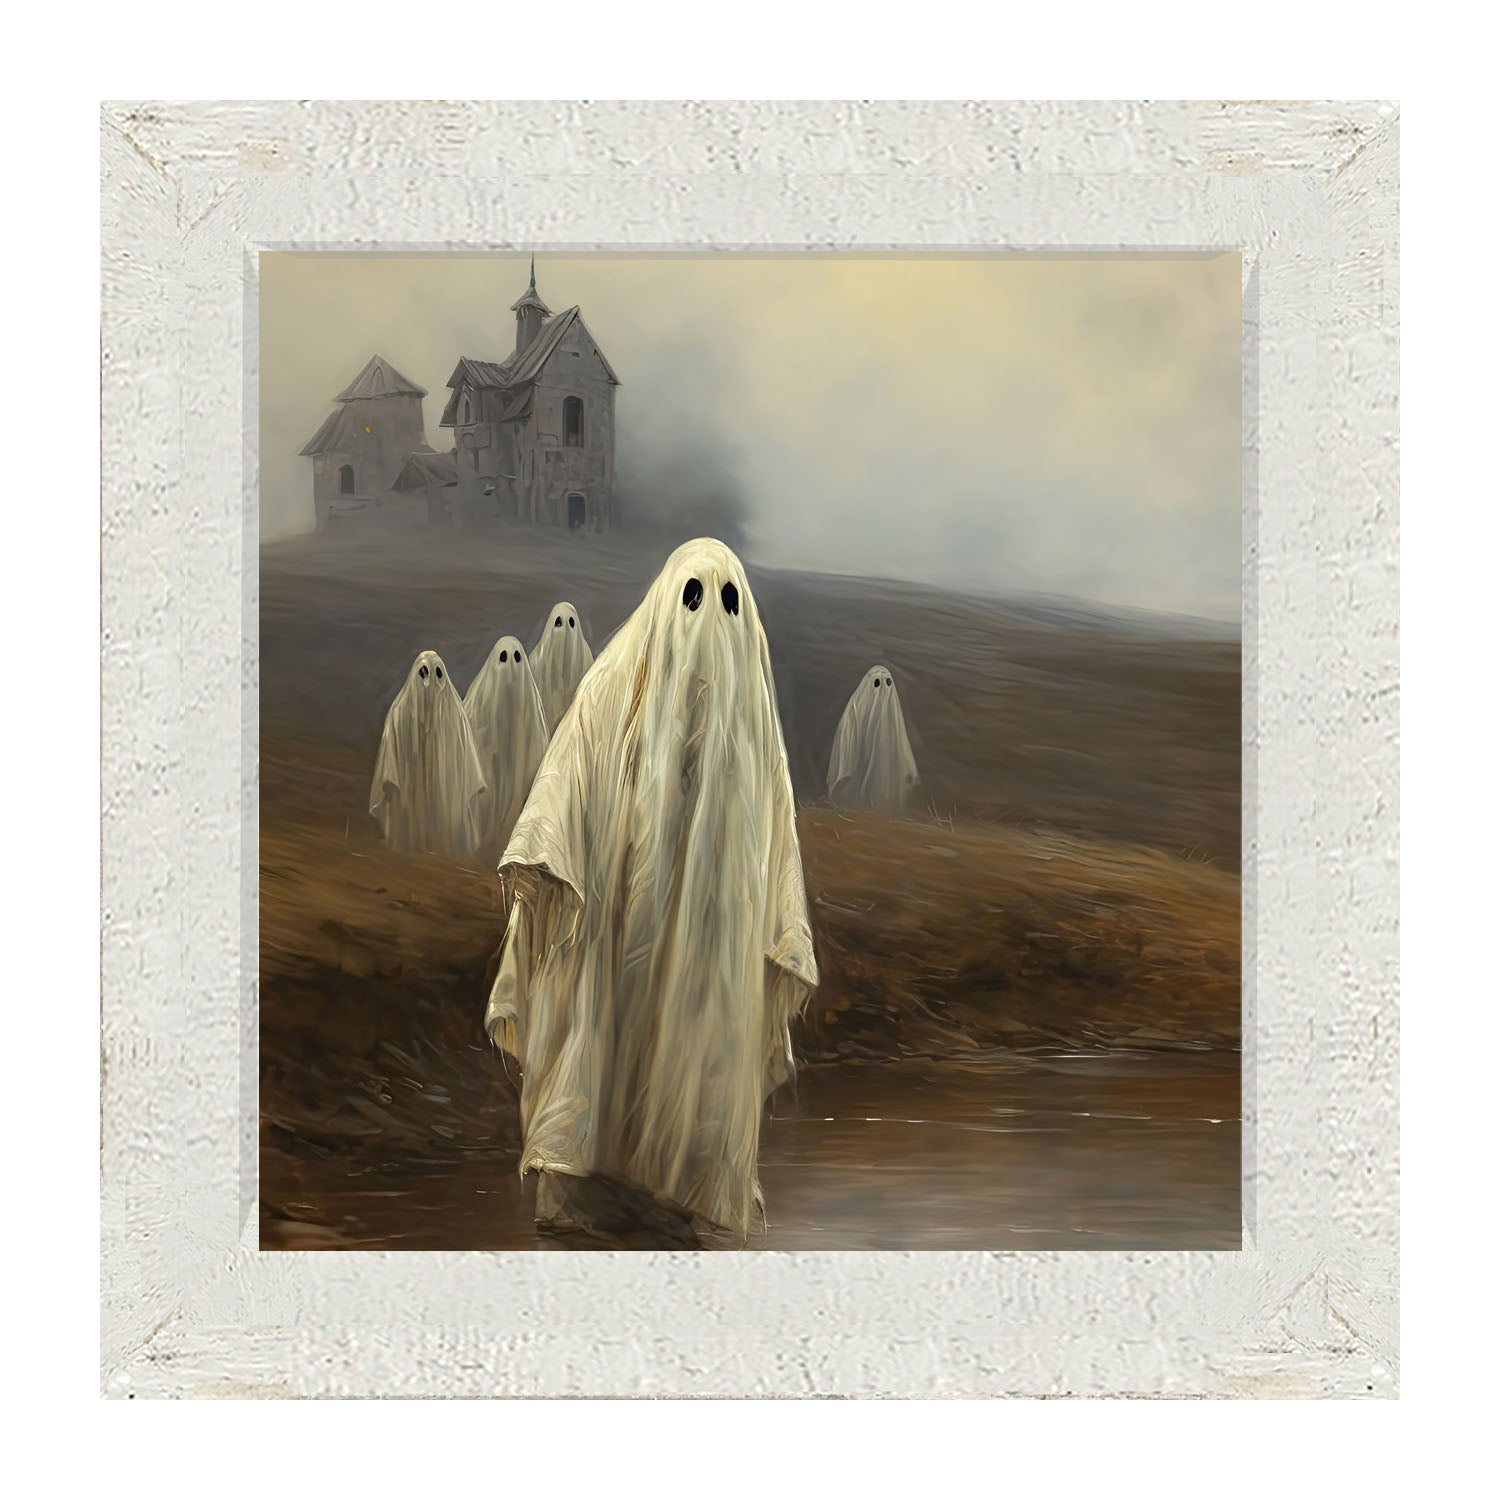 Ghosts in front of old house